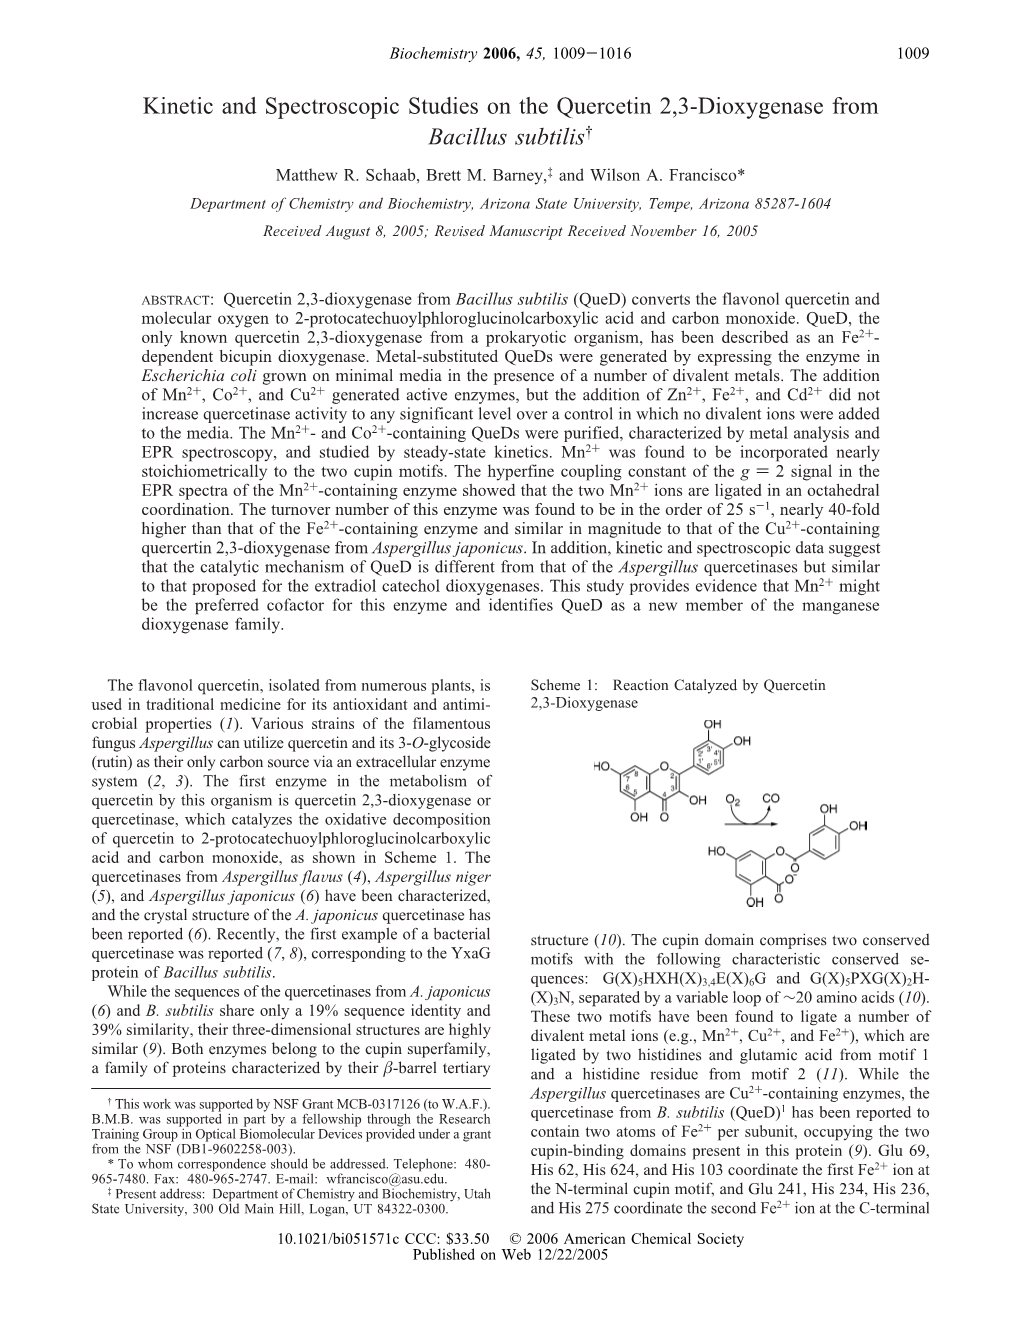 Kinetic and Spectroscopic Studies on the Quercetin 2,3-Dioxygenase from Bacillus Subtilis† Matthew R